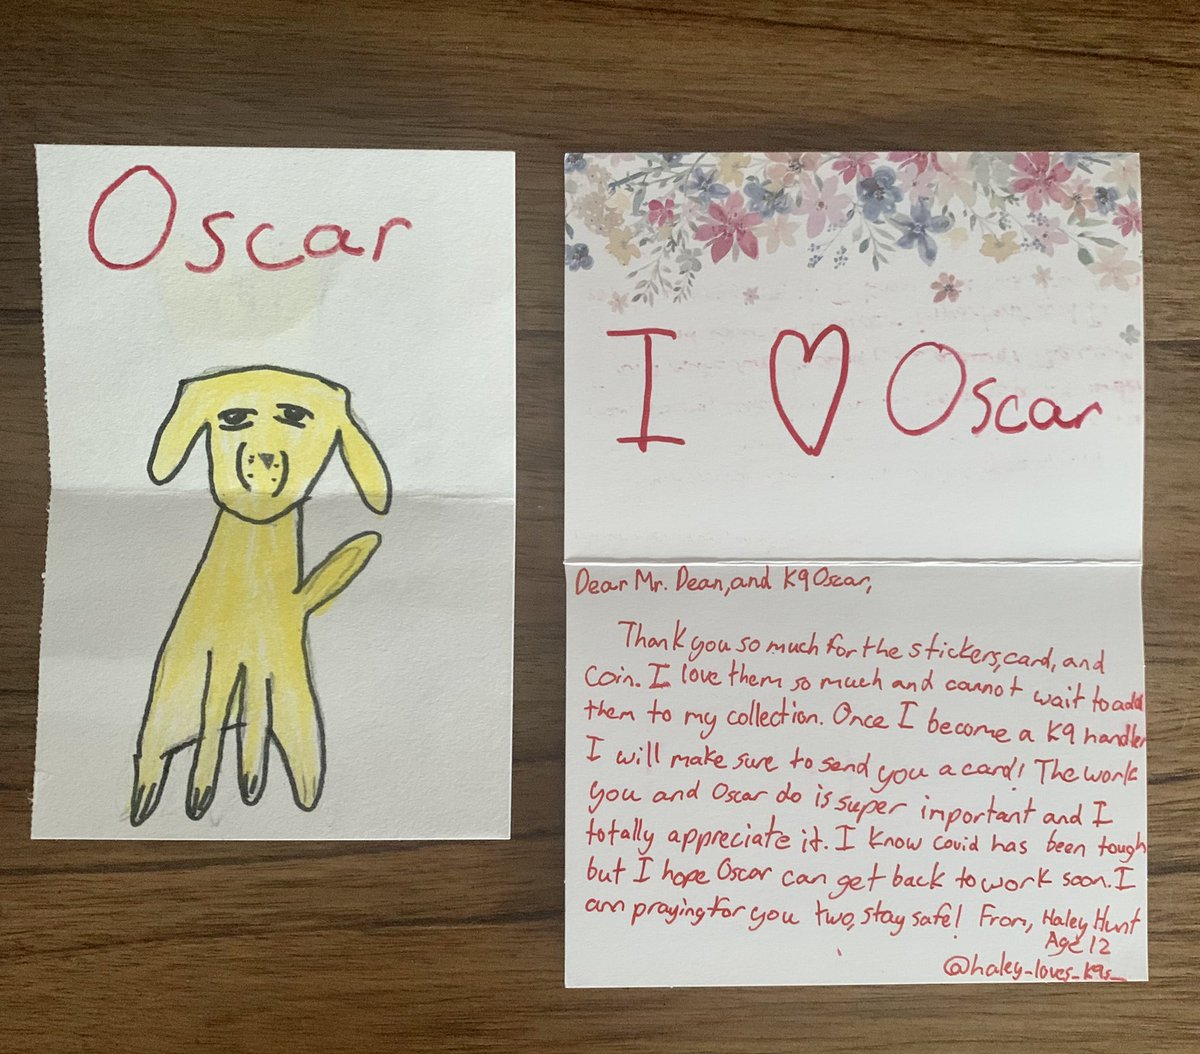 Oscar received a special card in the mail from a young lady that wants to be a K9 officer when she gets older. #dogs #dogsoftwitter #K9officer #ThinBlueLine #redline #firstresponders #therapydog #friends #blessed